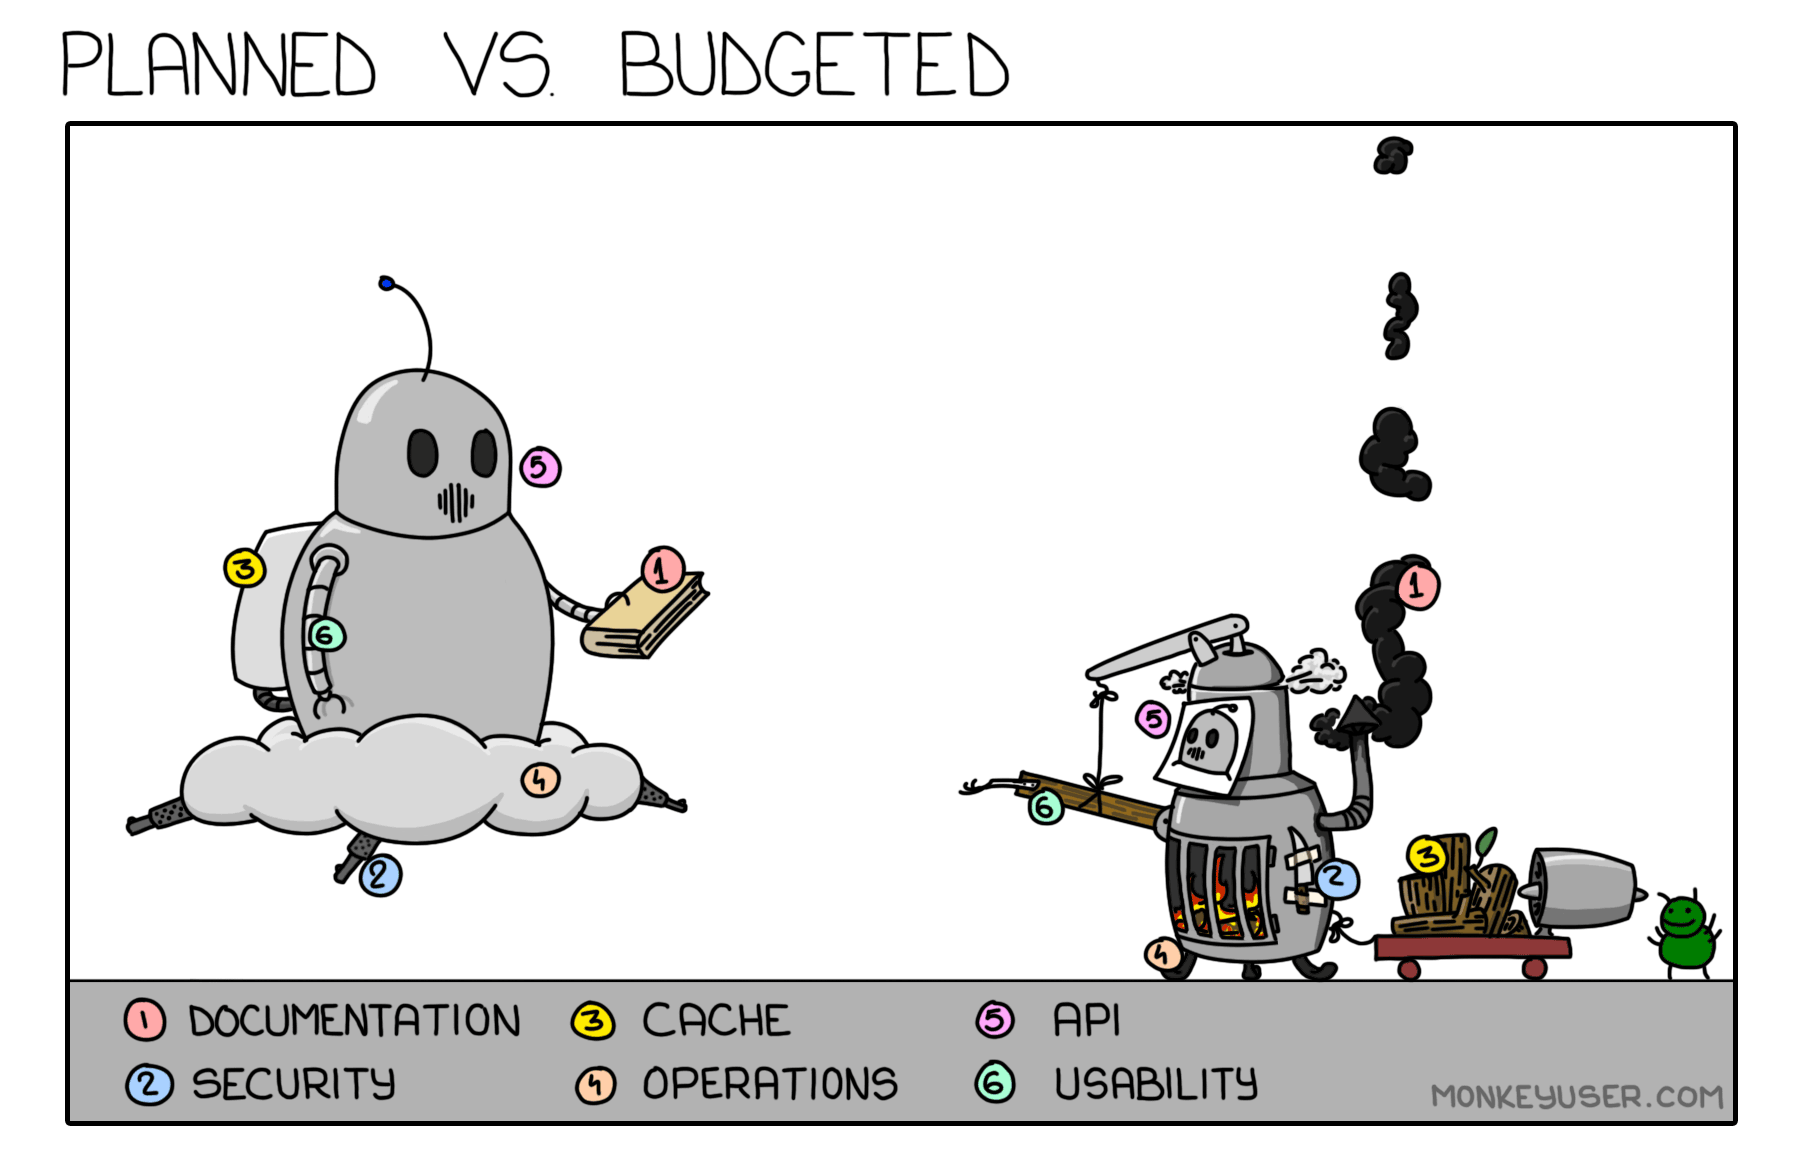 Planned vs Budgeted